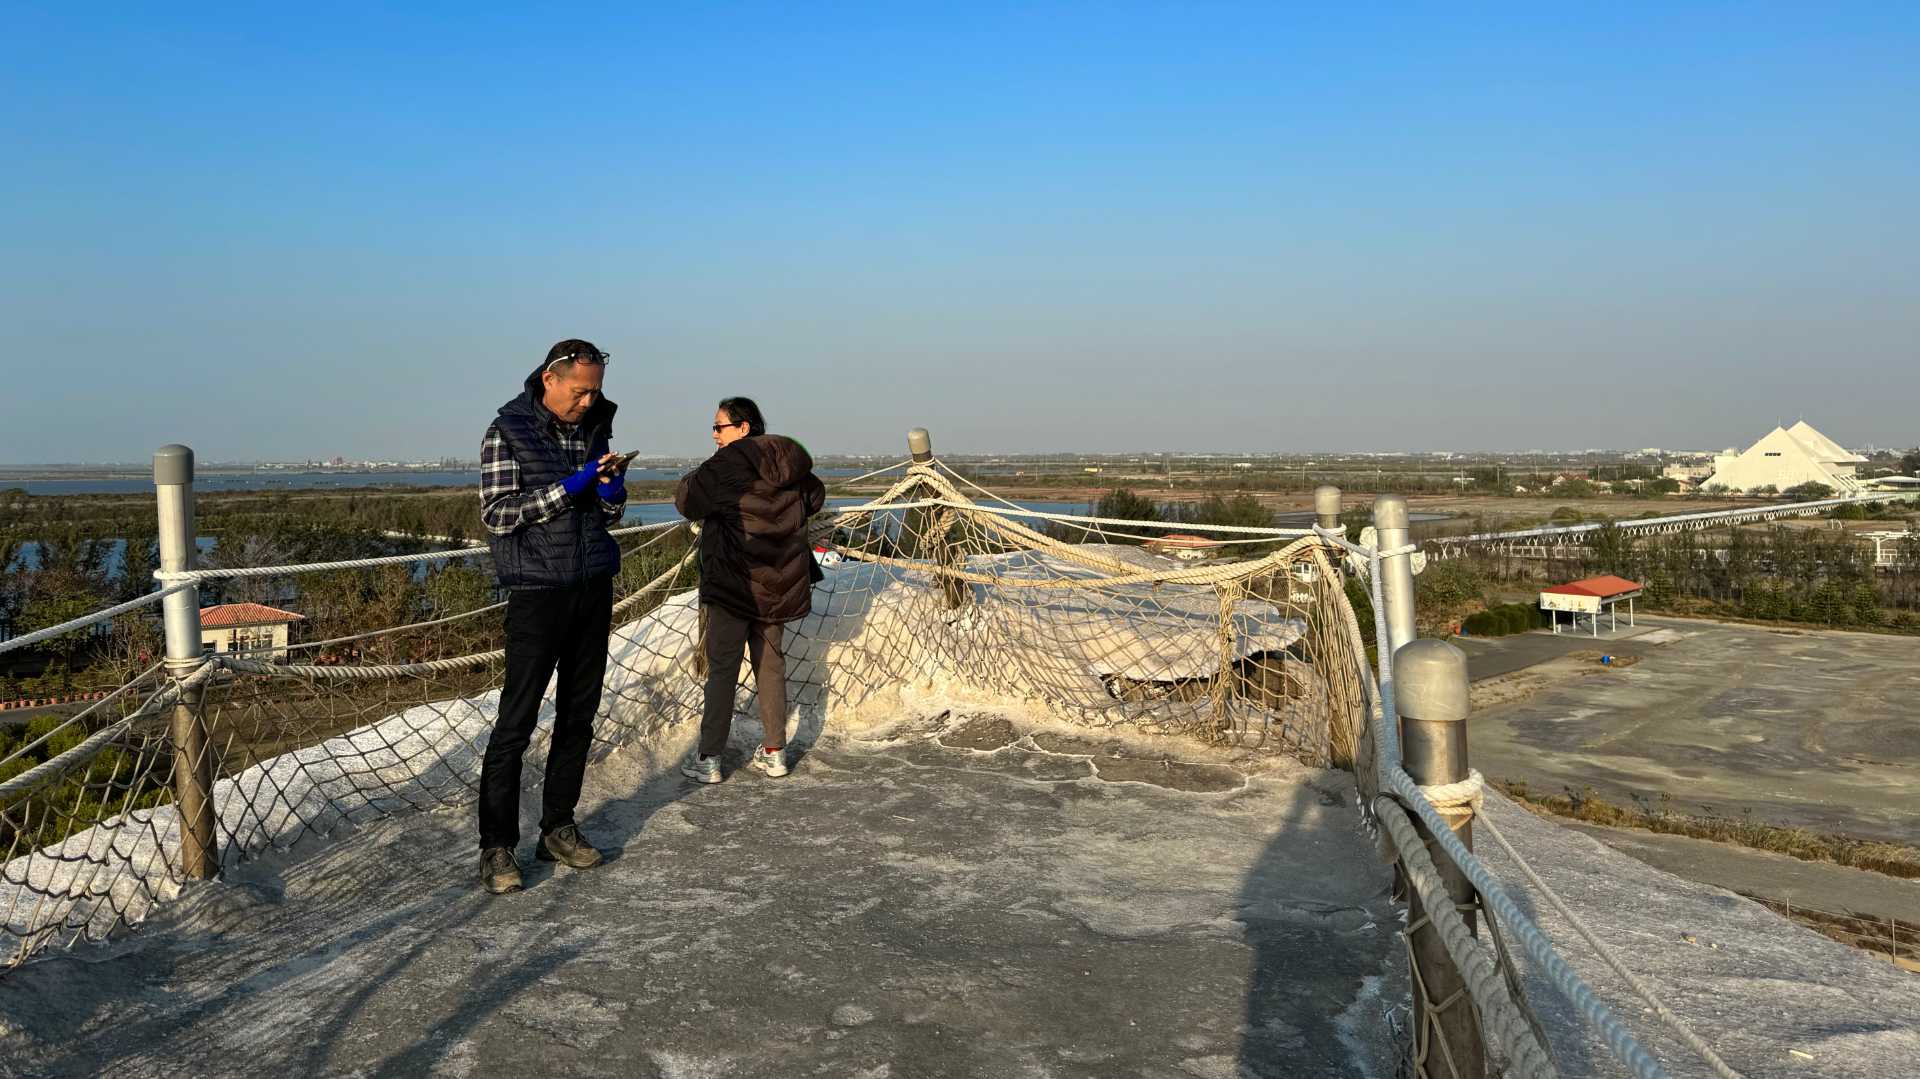 View from the top of Qigu Salt Mountain. There are two people standing on the top. The ground is a dirty gray where people have stood, but the rest of the salt mountain is white. The Tainan salt flats stretch out in the distance.